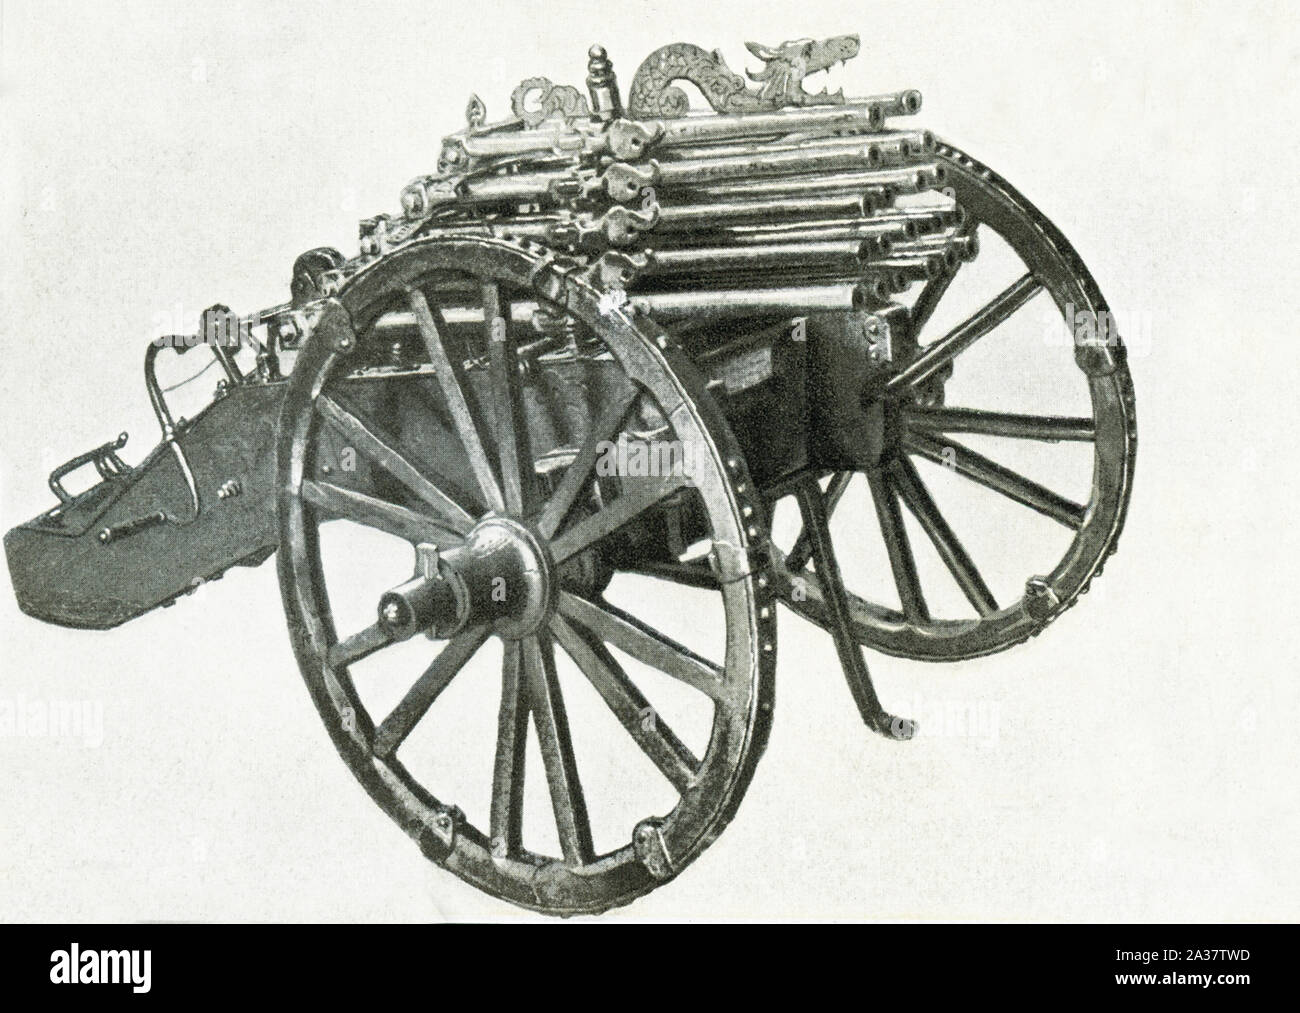 This image shows  an organ-gun, also known as a volley gun, that dates to 1600-1610. It has 20 iron gun barrels on five different levels. Stock Photo